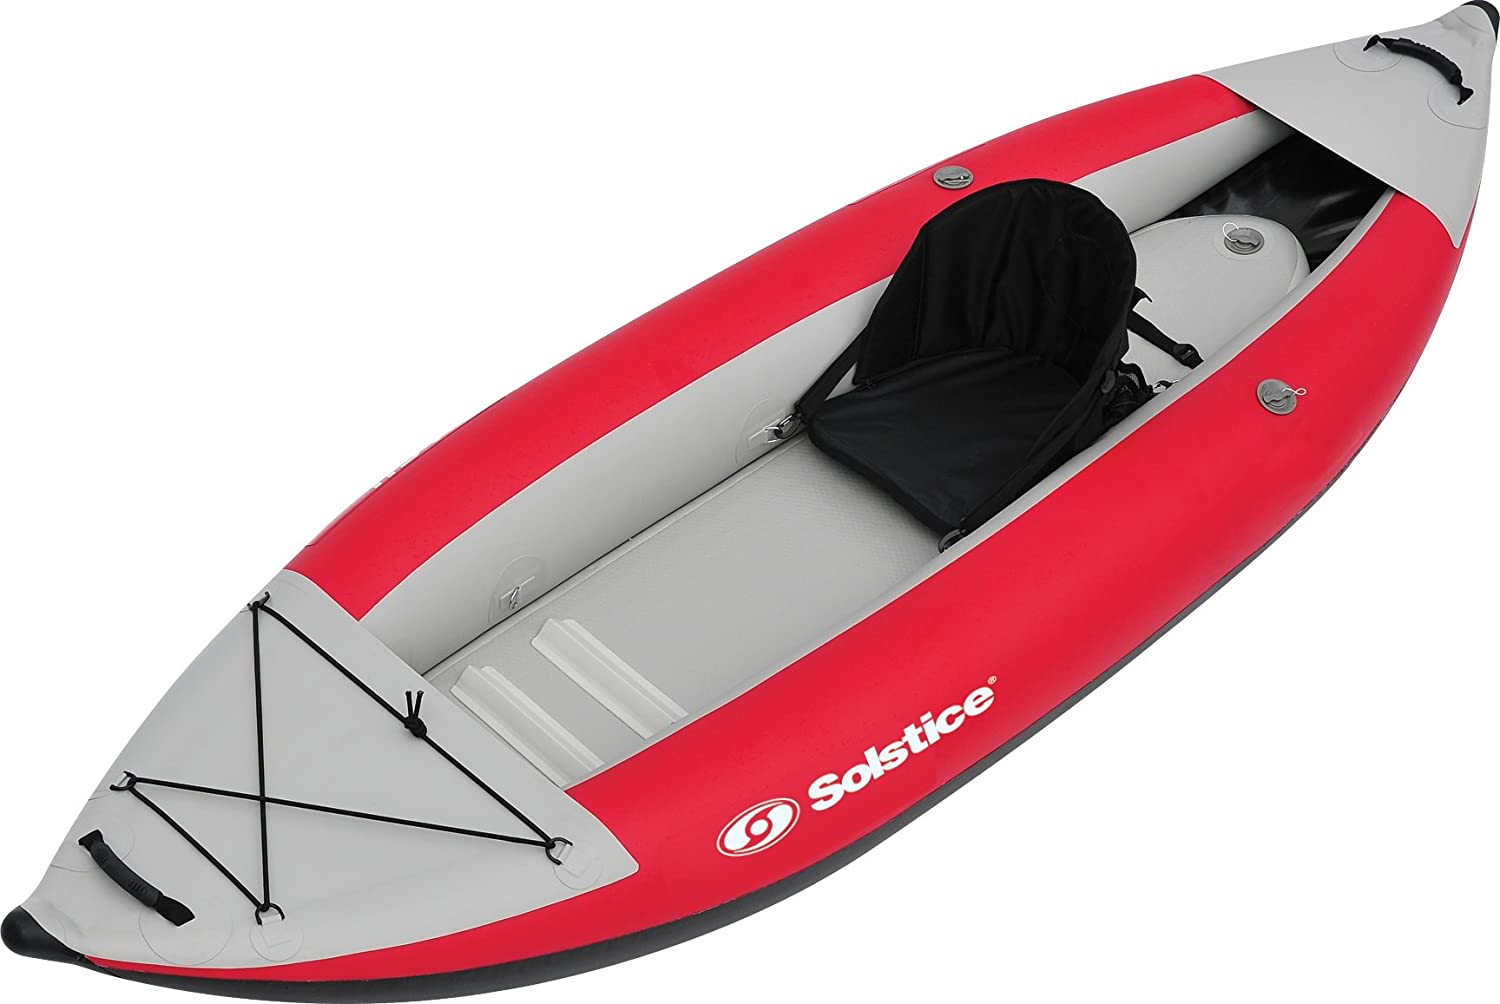 Solstice by Swimline Flare 1 Person Kayak